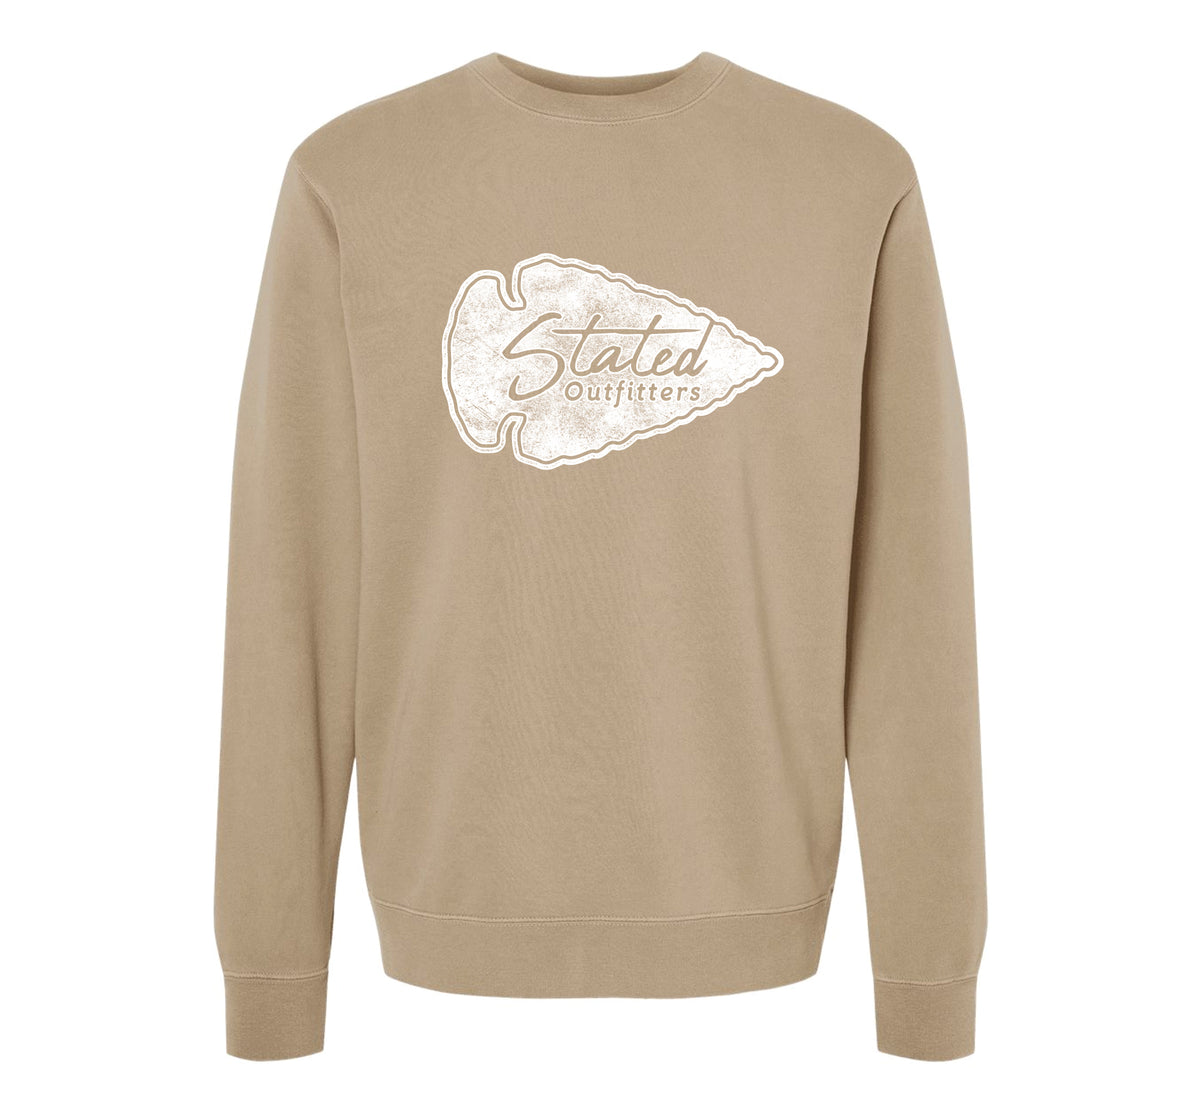 Stated Outfitters Arrowhead Sweatshirt